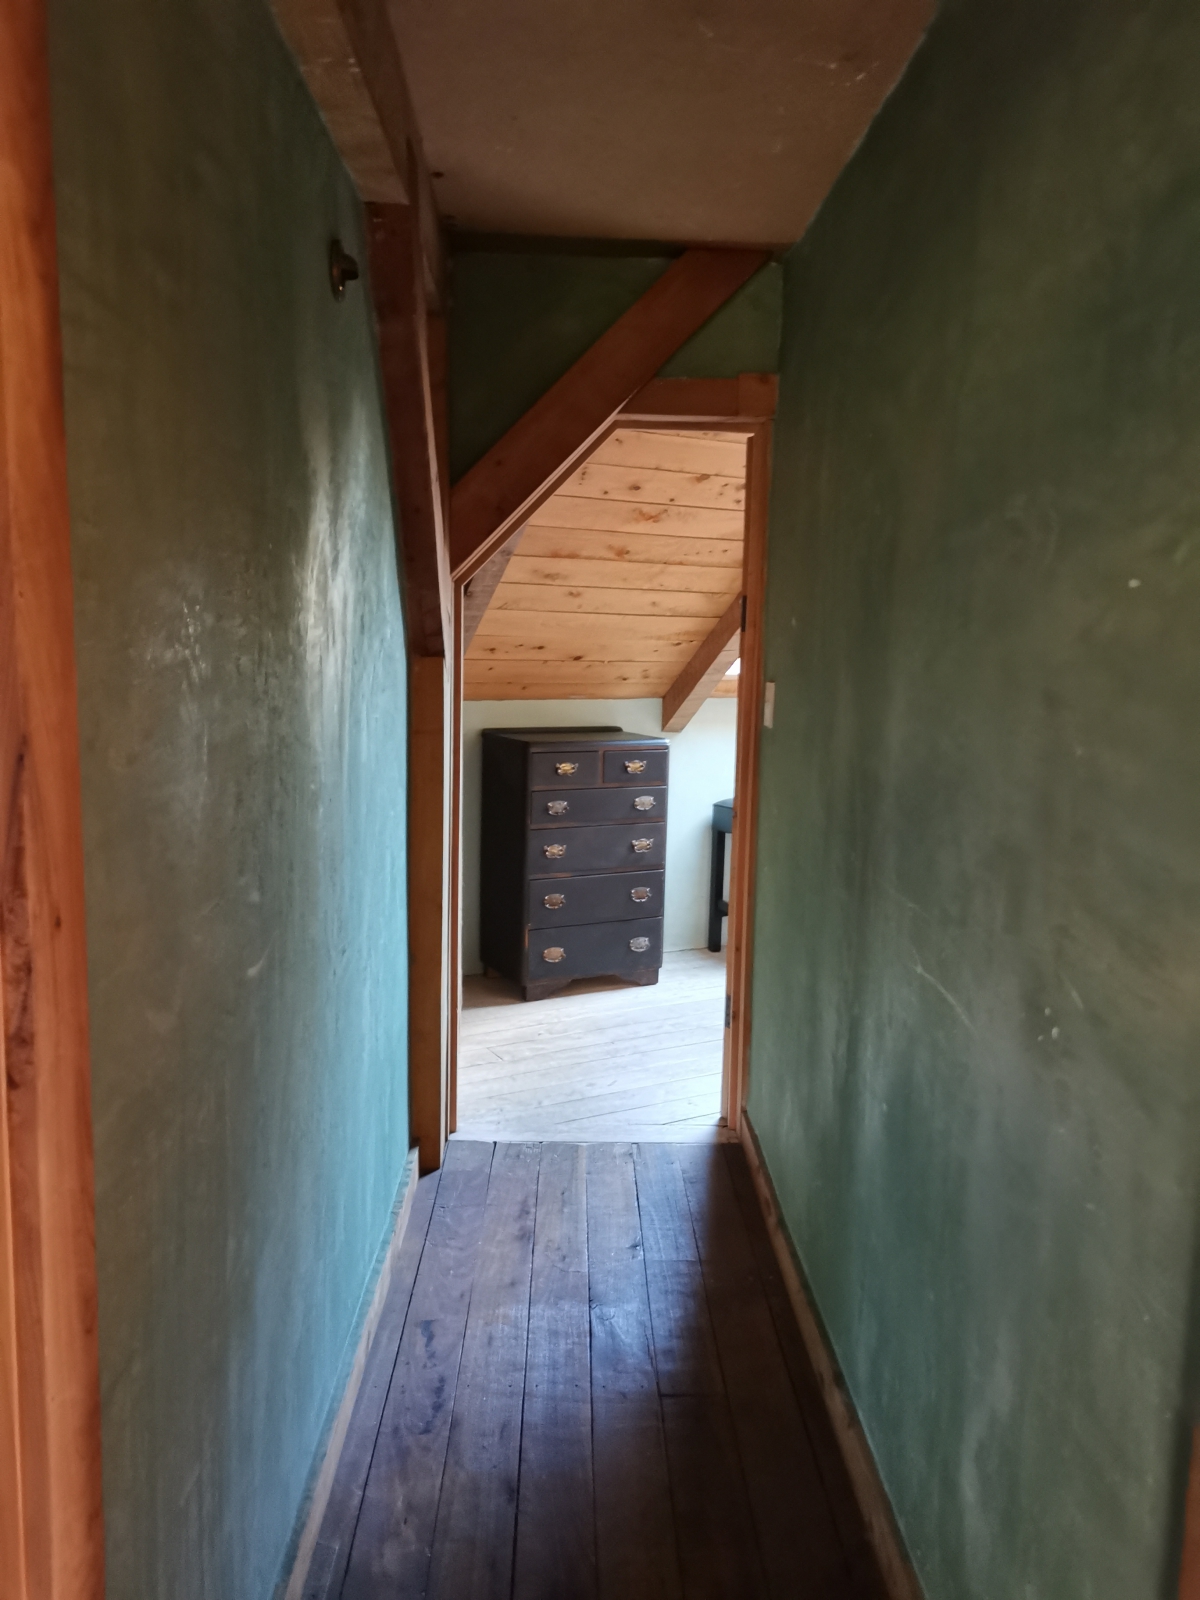 Photo of property: access to the wing is off the main passageway on the second level, opening into the first of two rooms divided by a door